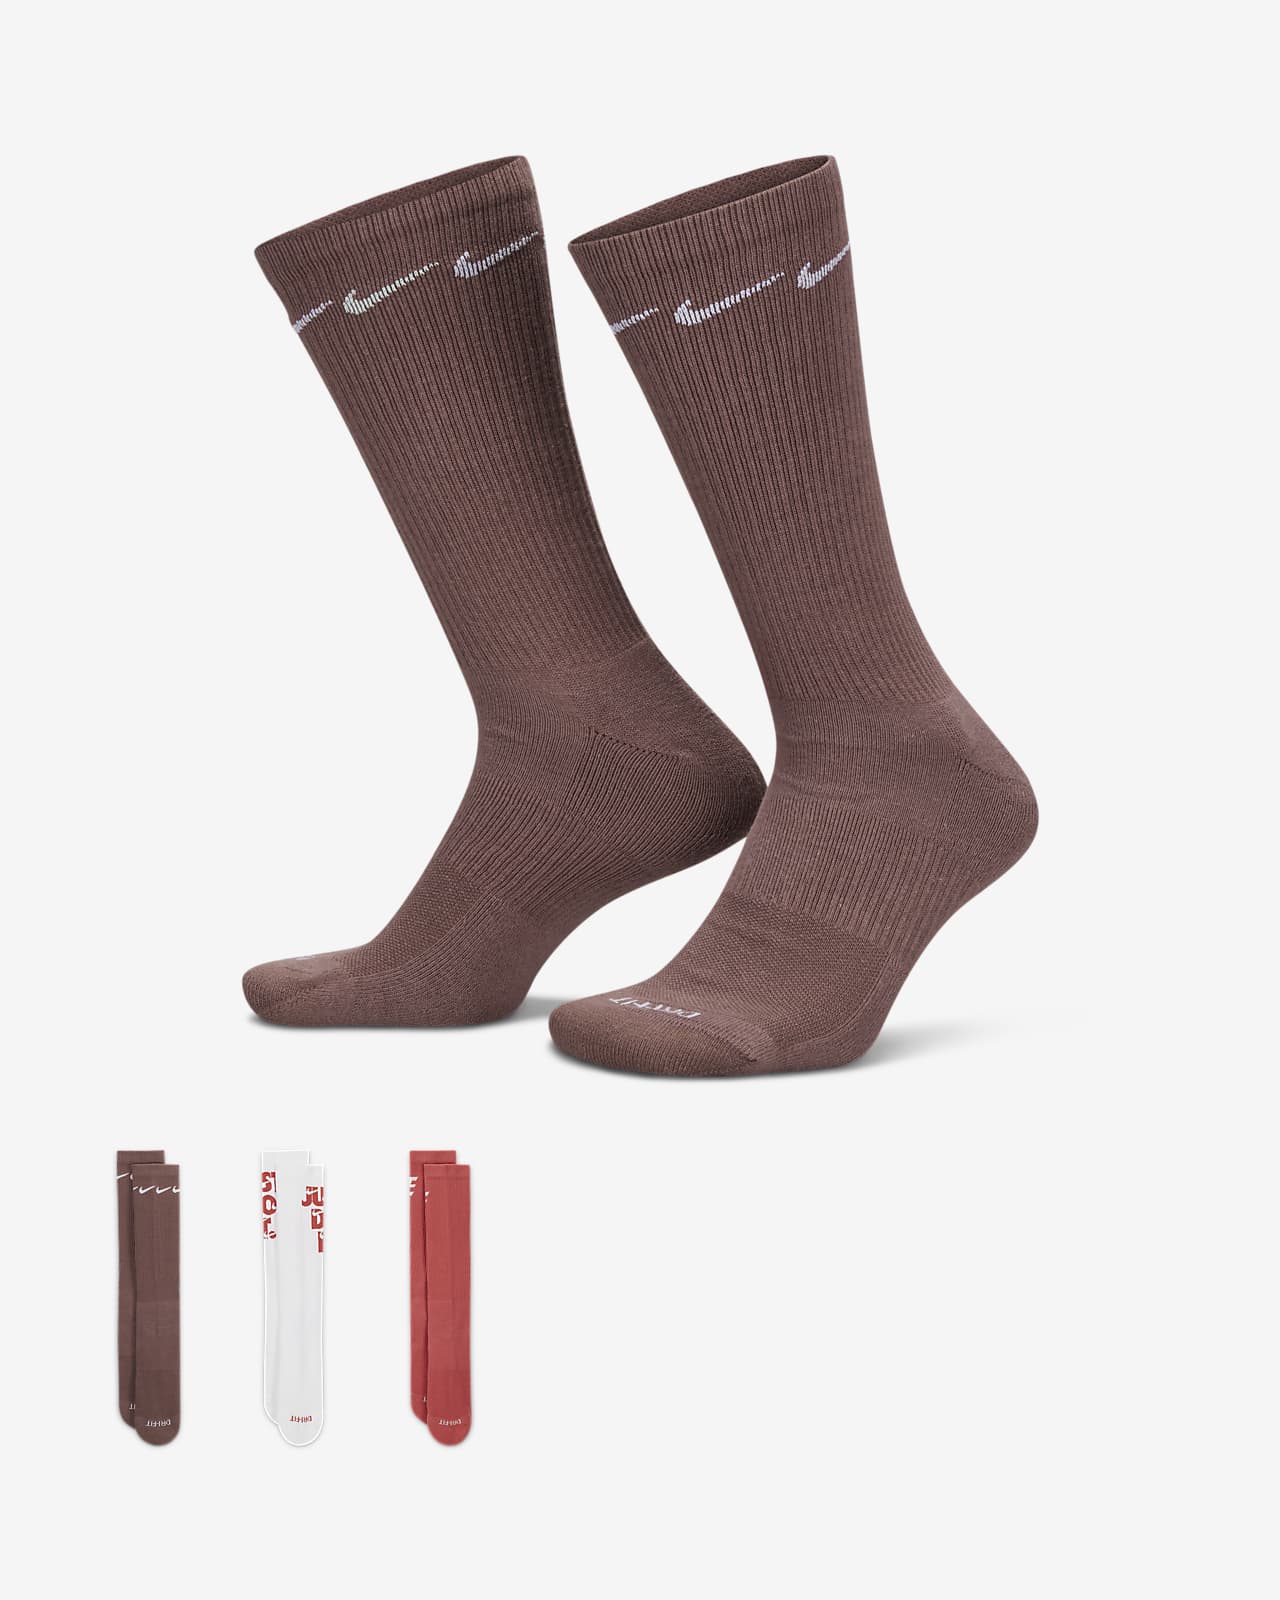 Chaussettes Nike Everyday Plus